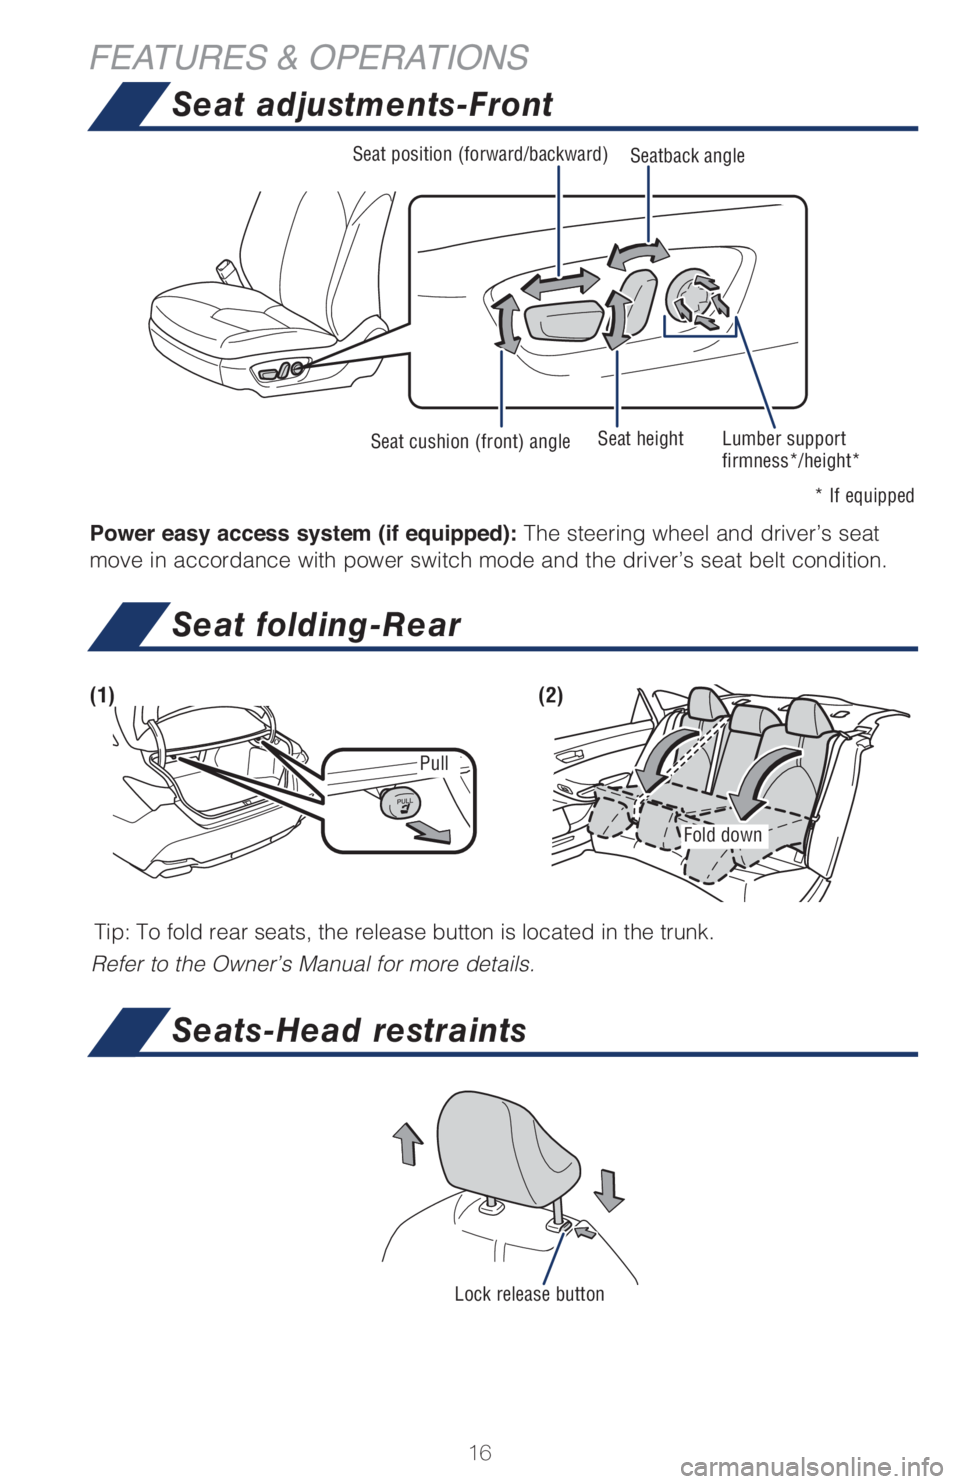 TOYOTA AVALON 2021   (in English) User Guide 16
FEATURES & OPERATIONS
Seat adjustments-Front
Seat position (forward/backward)
Seat cushion (front) angleSeat height
* If equipped Lumber support 
firmness*/height* Seatback angle
Seats-Head restrai